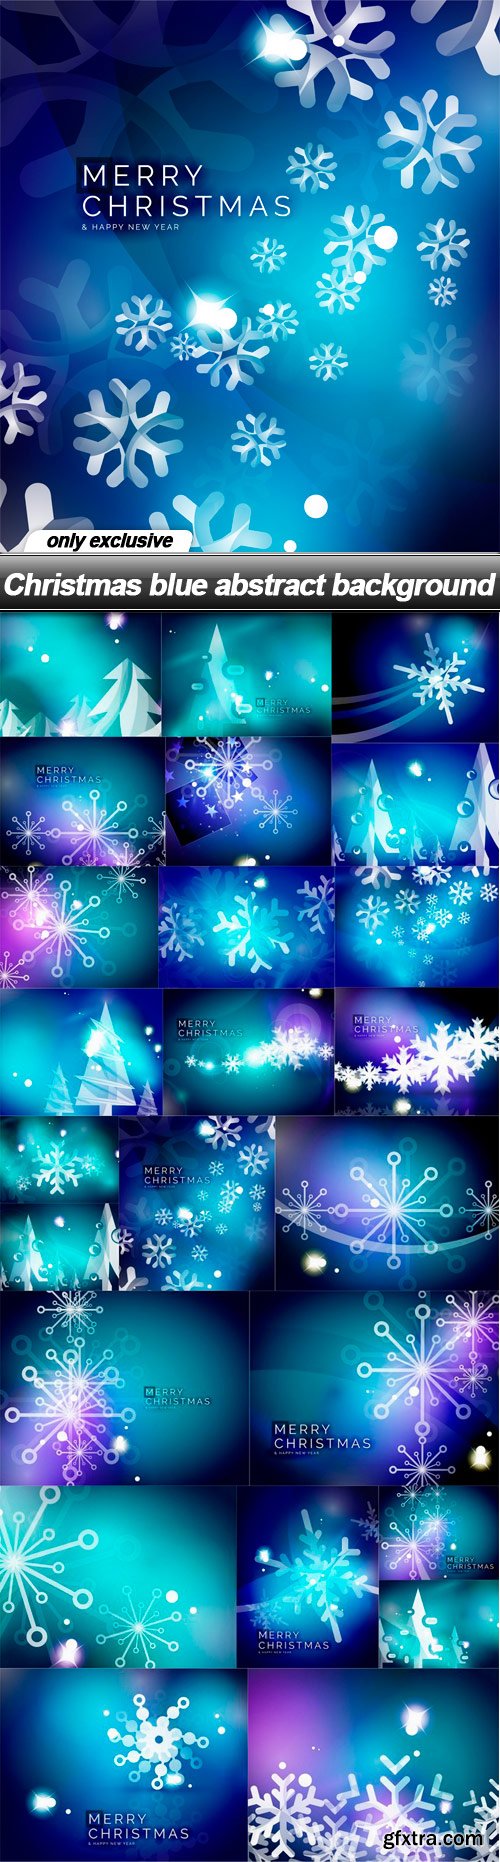 Christmas blue abstract background - 24 EPS